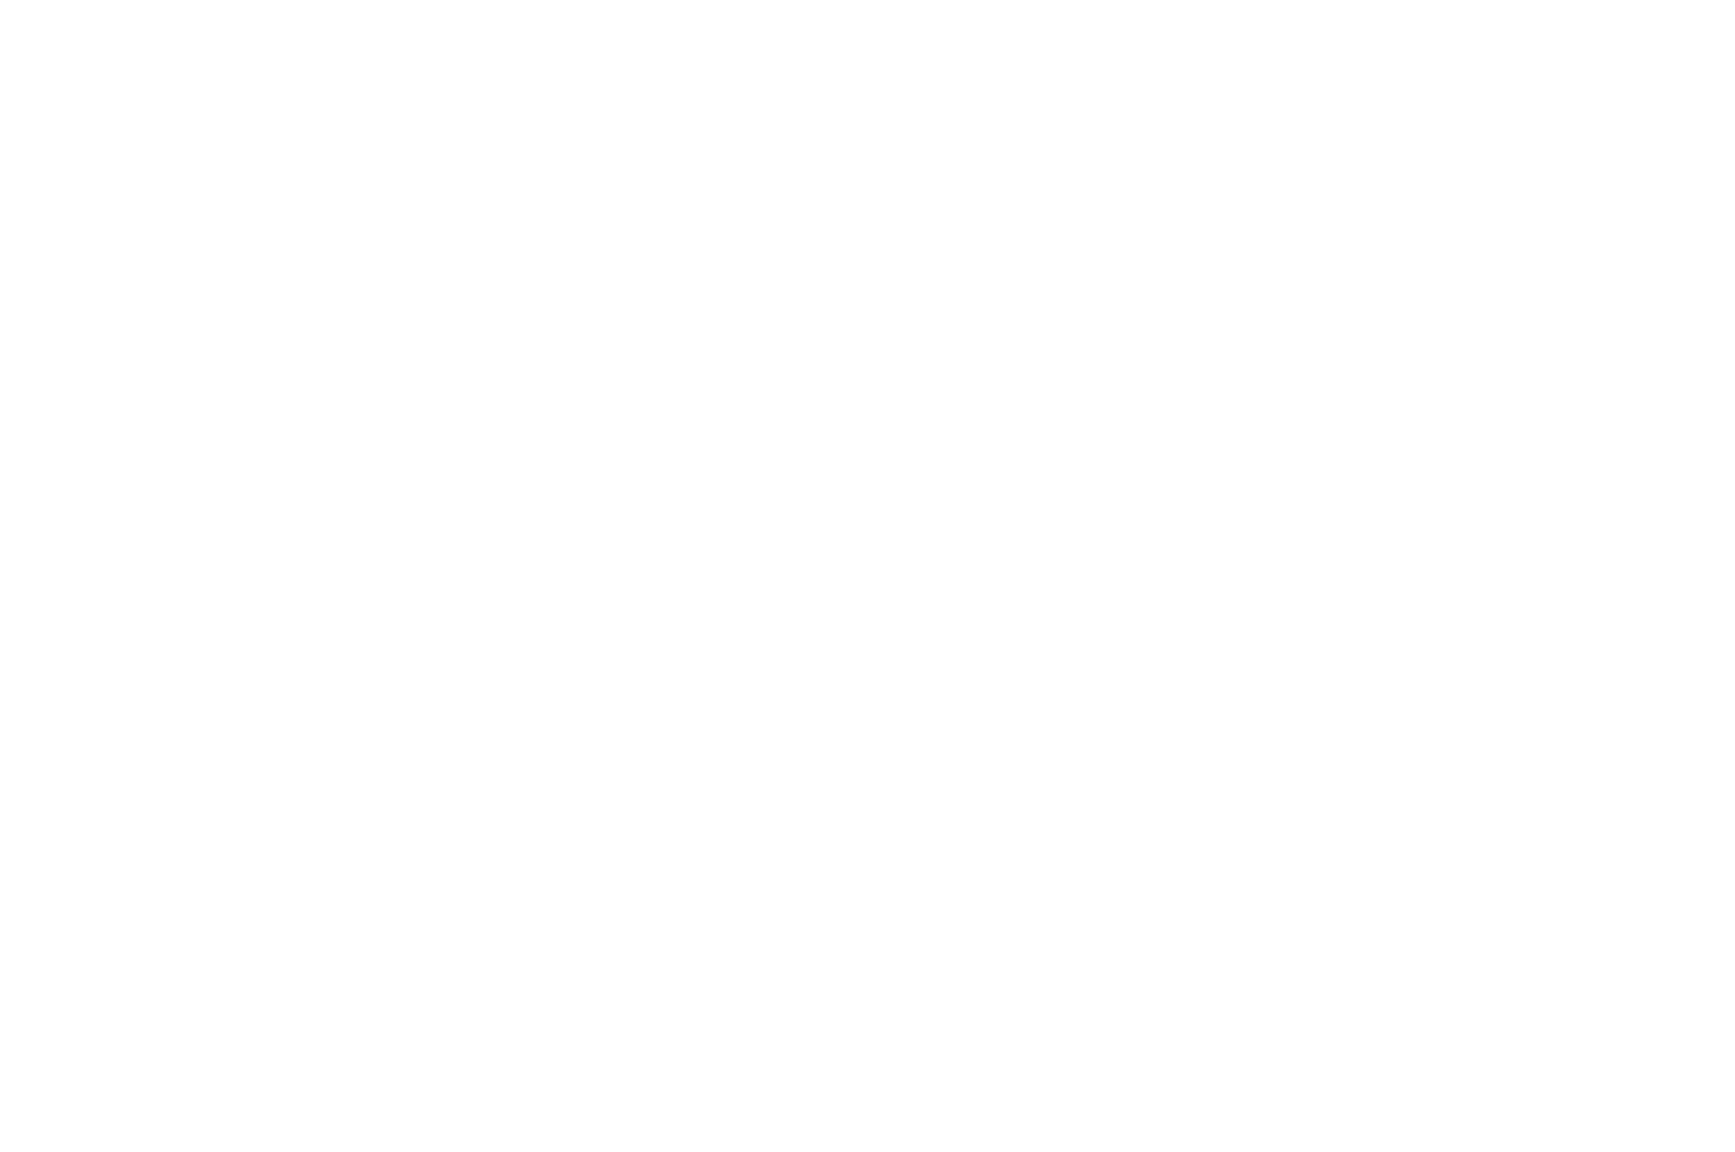 Laurel OFFICIAL SELECTION - 24th AAWIC Film Festival - 2024